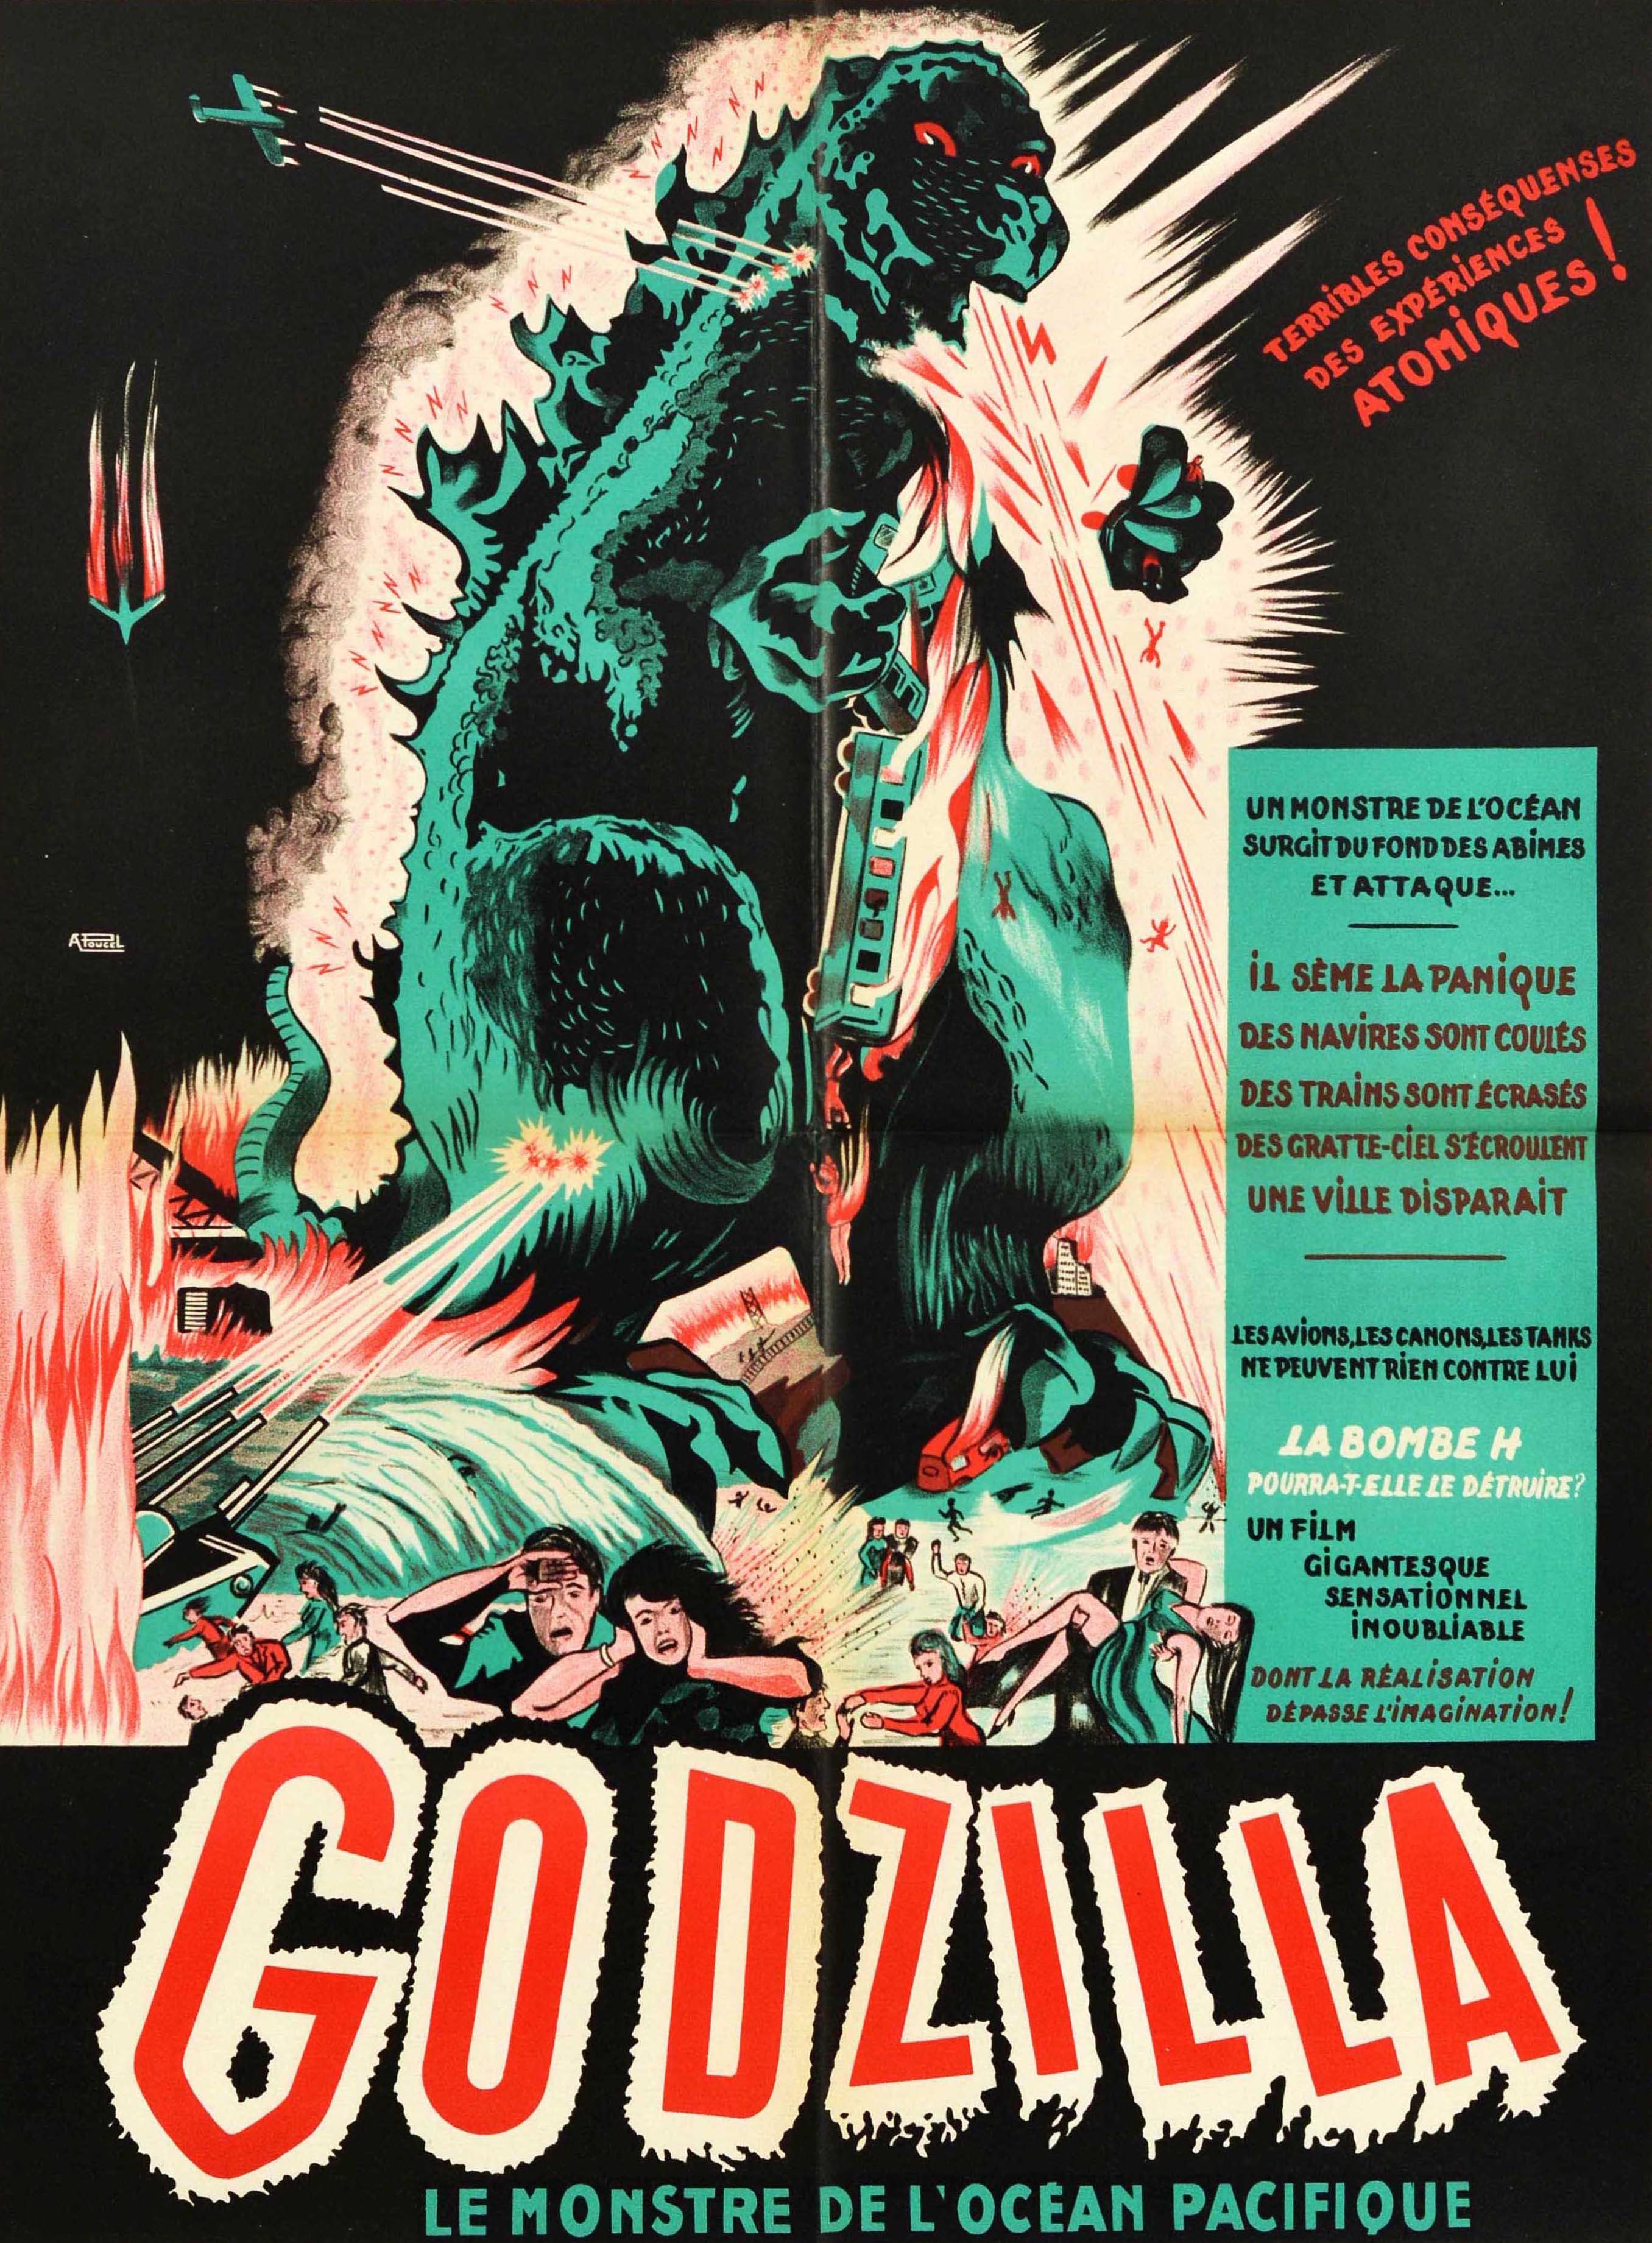 Original vintage movie poster for a science fiction action horror film - Godzilla Le Monstre de l'Ocean Pacifique / The Monster of the Pacific Ocean - featuring a dynamic scifi illustration of people fleeing in terror from the creature Godzilla with